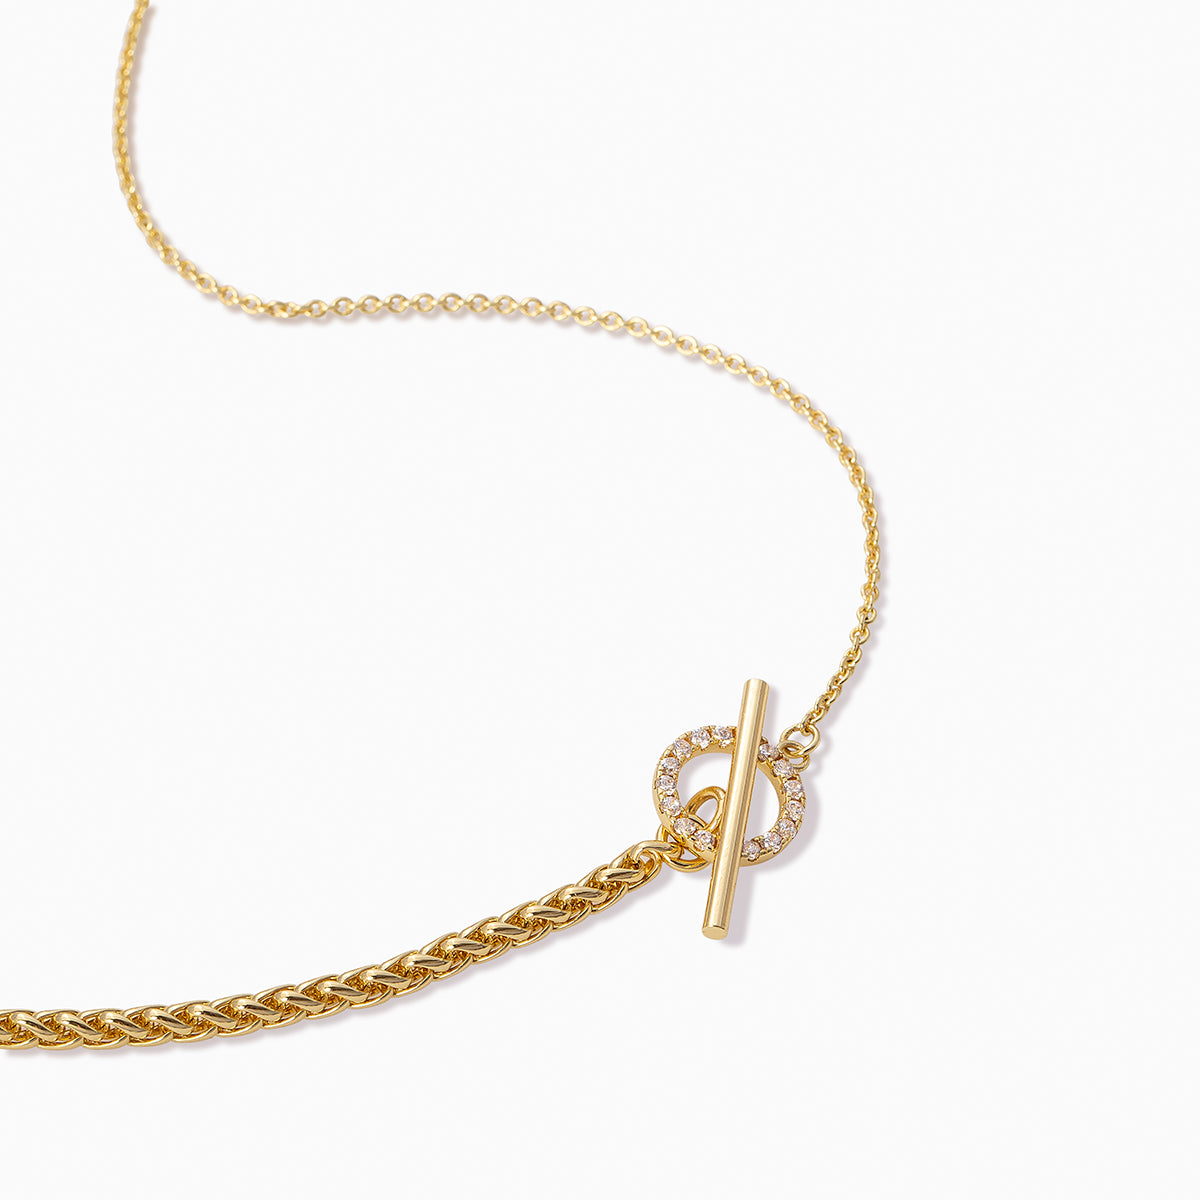 Turn It Up Chain Necklace | Gold | Product Detail Image | Uncommon James